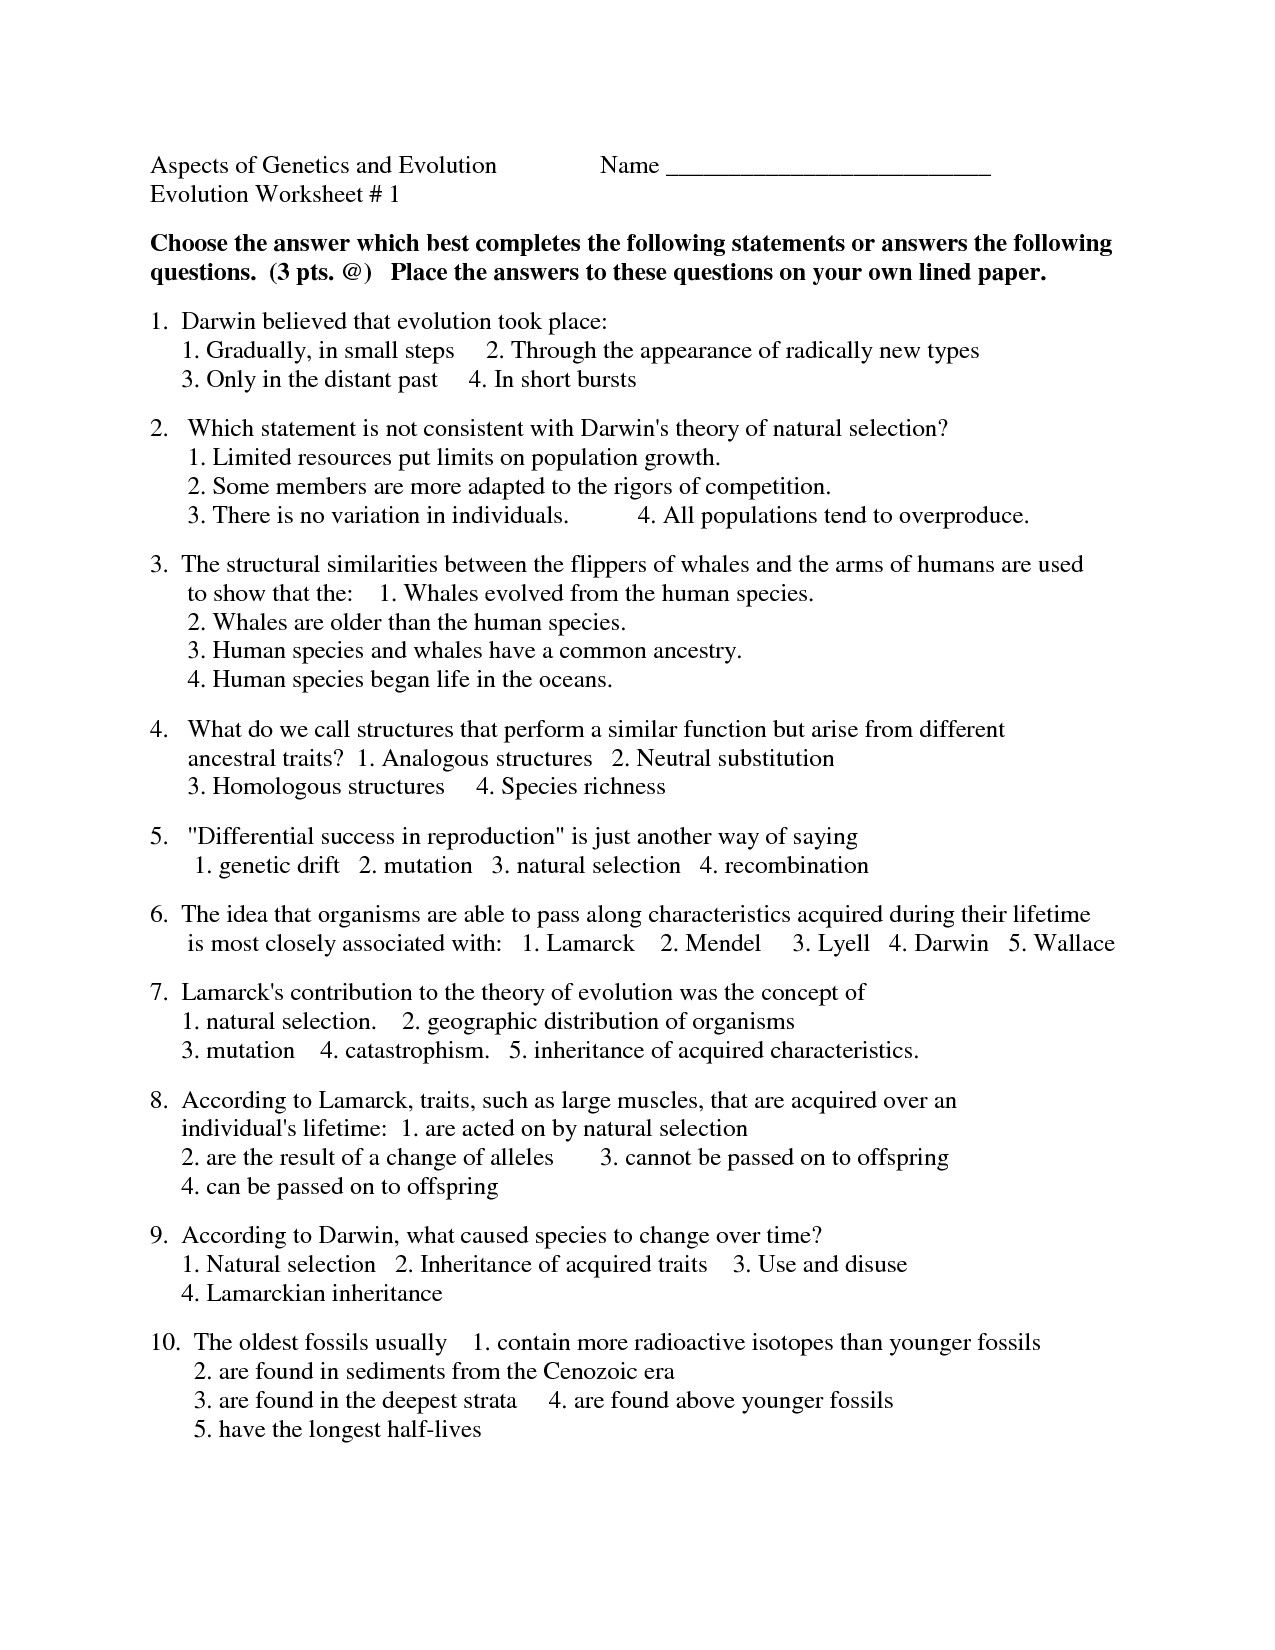 Days Of Evolution Worksheet Answers